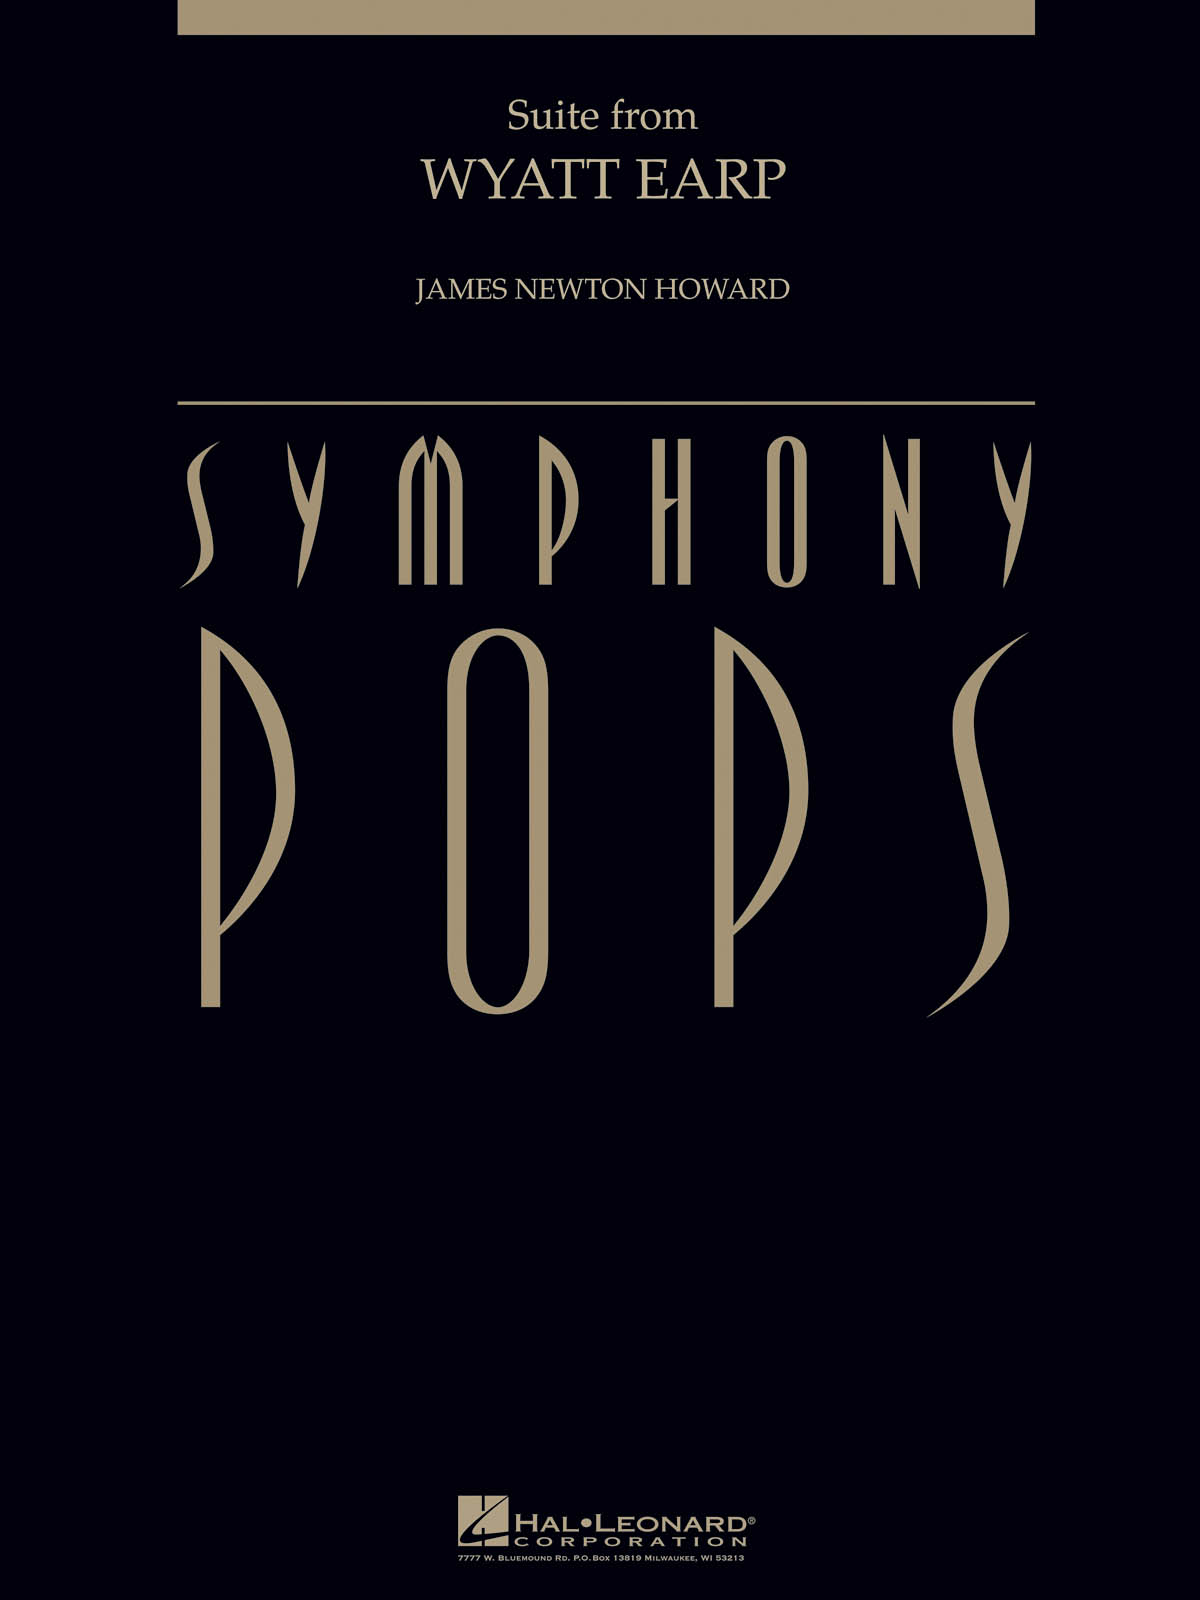 James Newton Howard: Suite from Wyatt Earp: Orchestra: Score and Parts